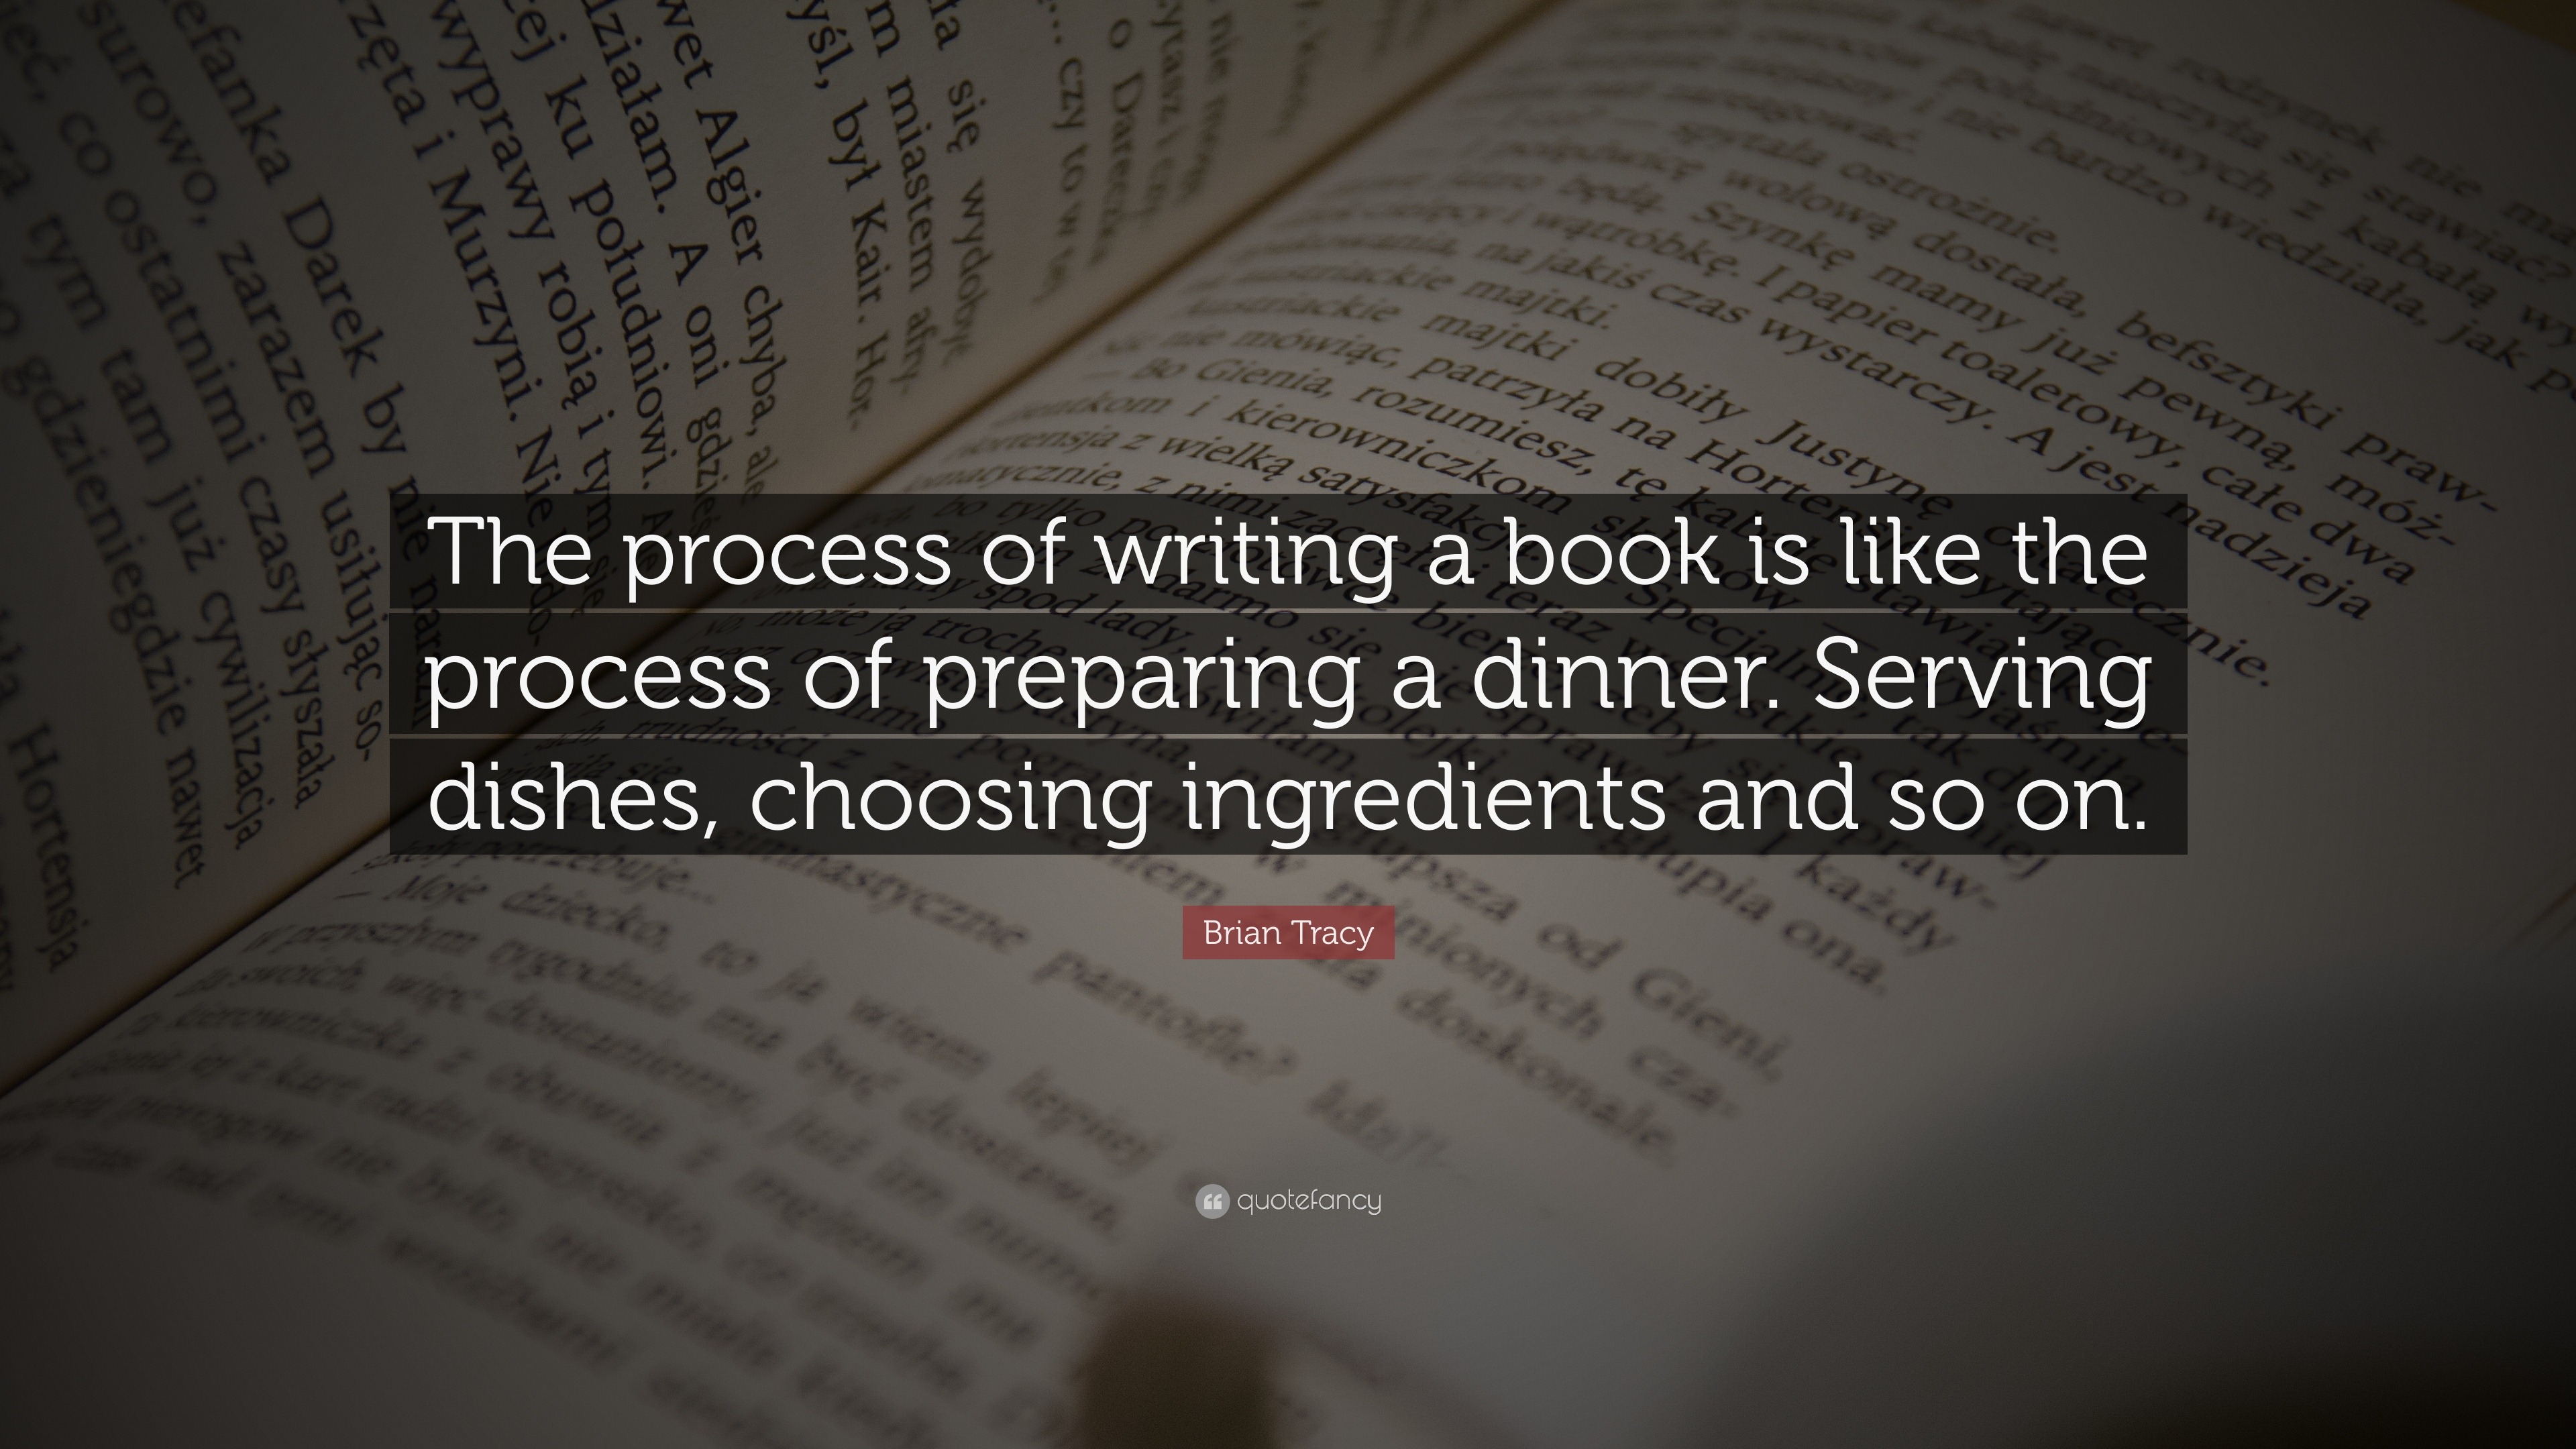 Brian Tracy Quote: “The process of writing a book is like the